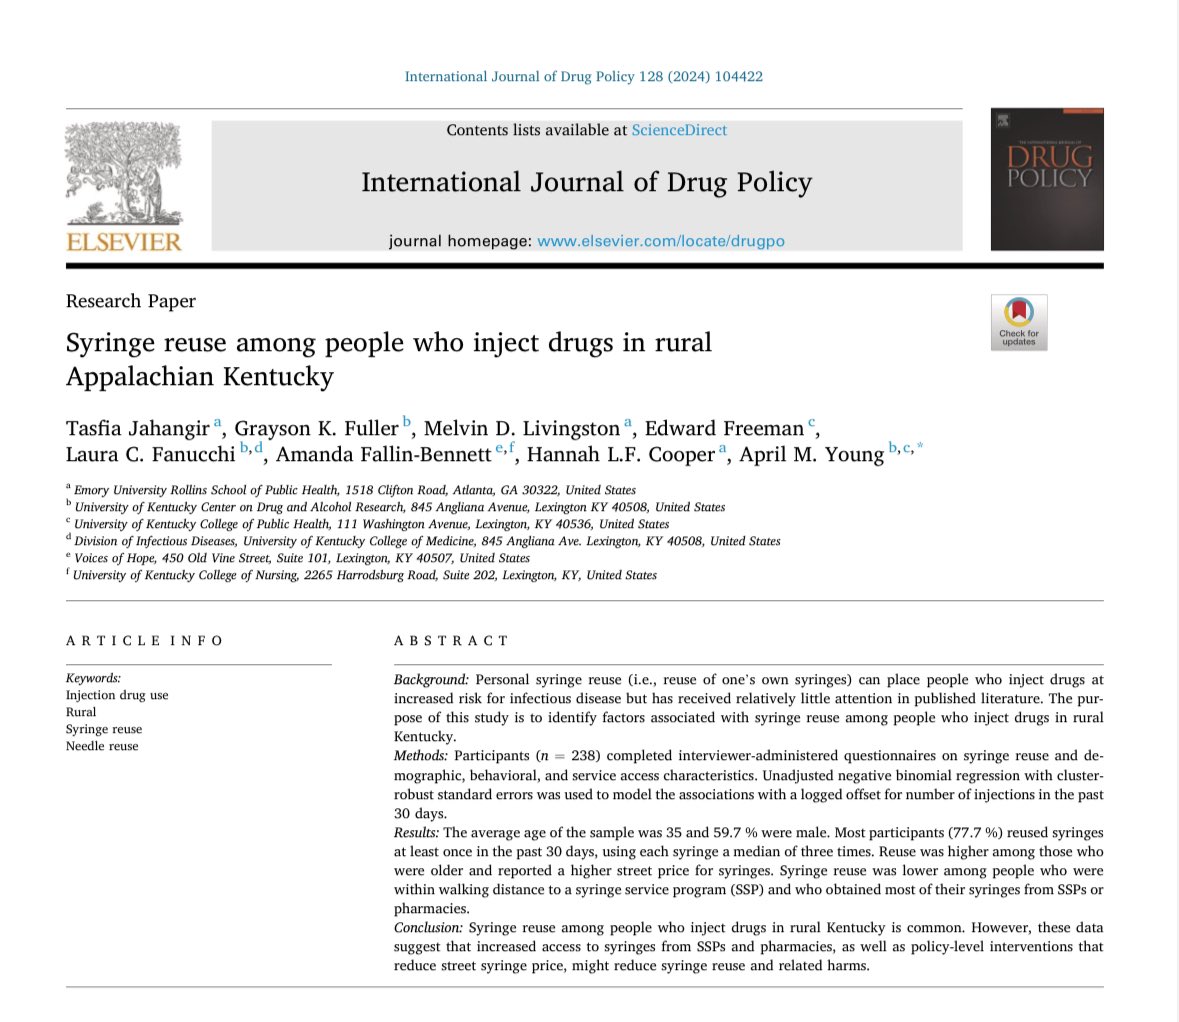 “Syringe reuse among people who inject drugs in rural Appalachian Kentucky” by Tasfia Jahangir et al (2024) via @ijdrugpolicy…why are people against syringe services? It forces people to reuse unsafe syringes.

Link: sciencedirect.com/science/articl…

#HarmReduction